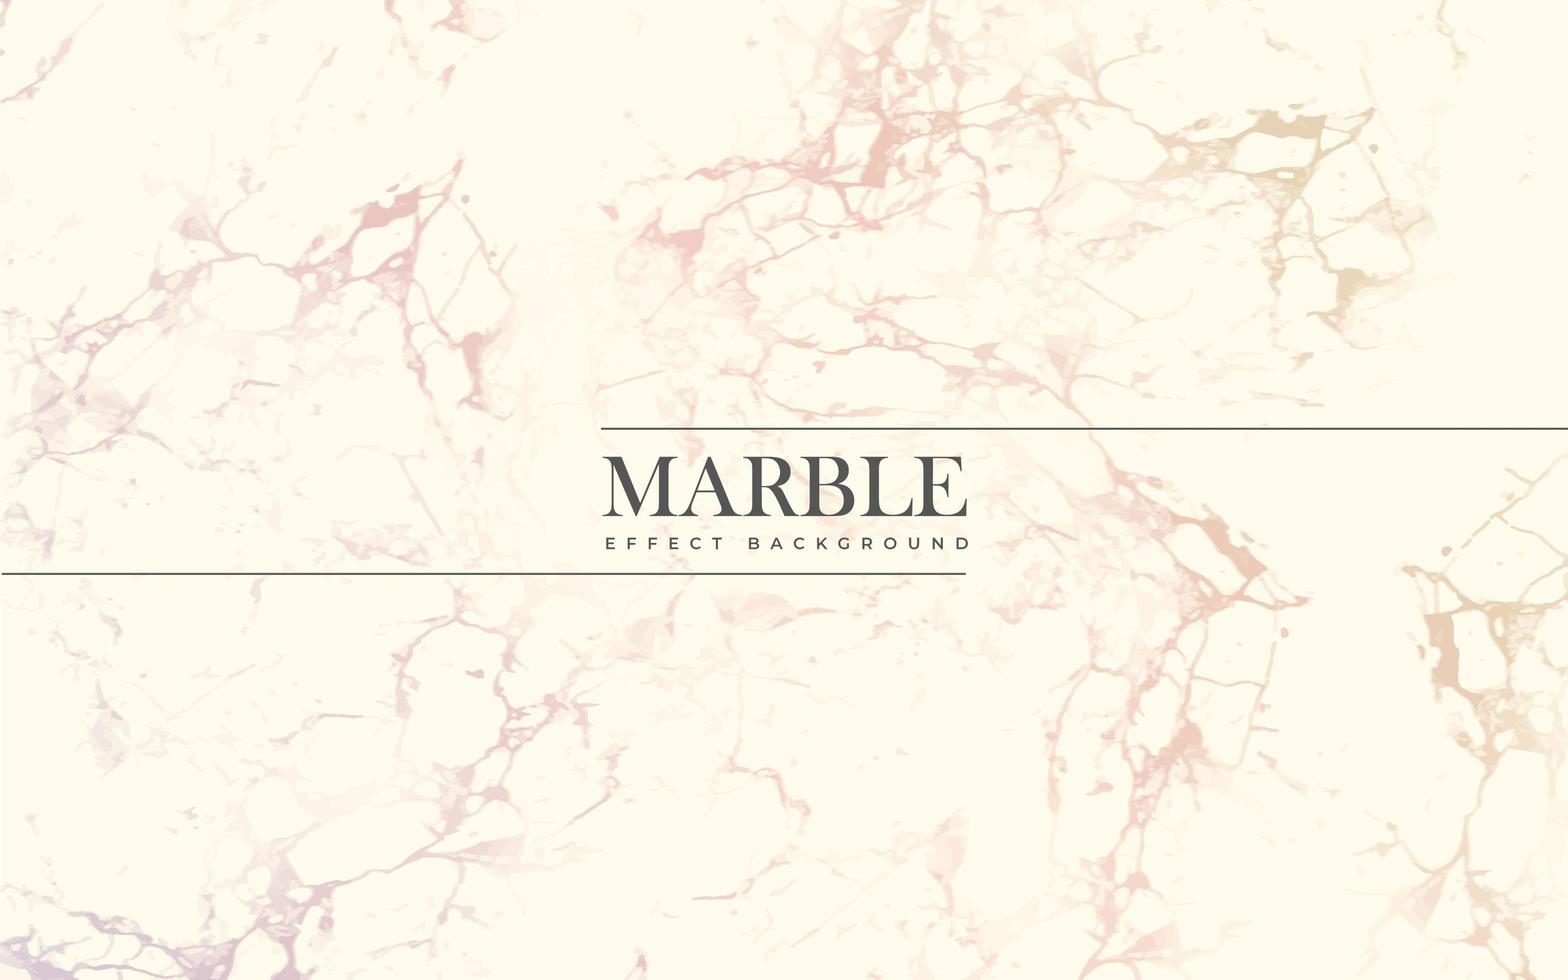 Brown and pink marble texture vector